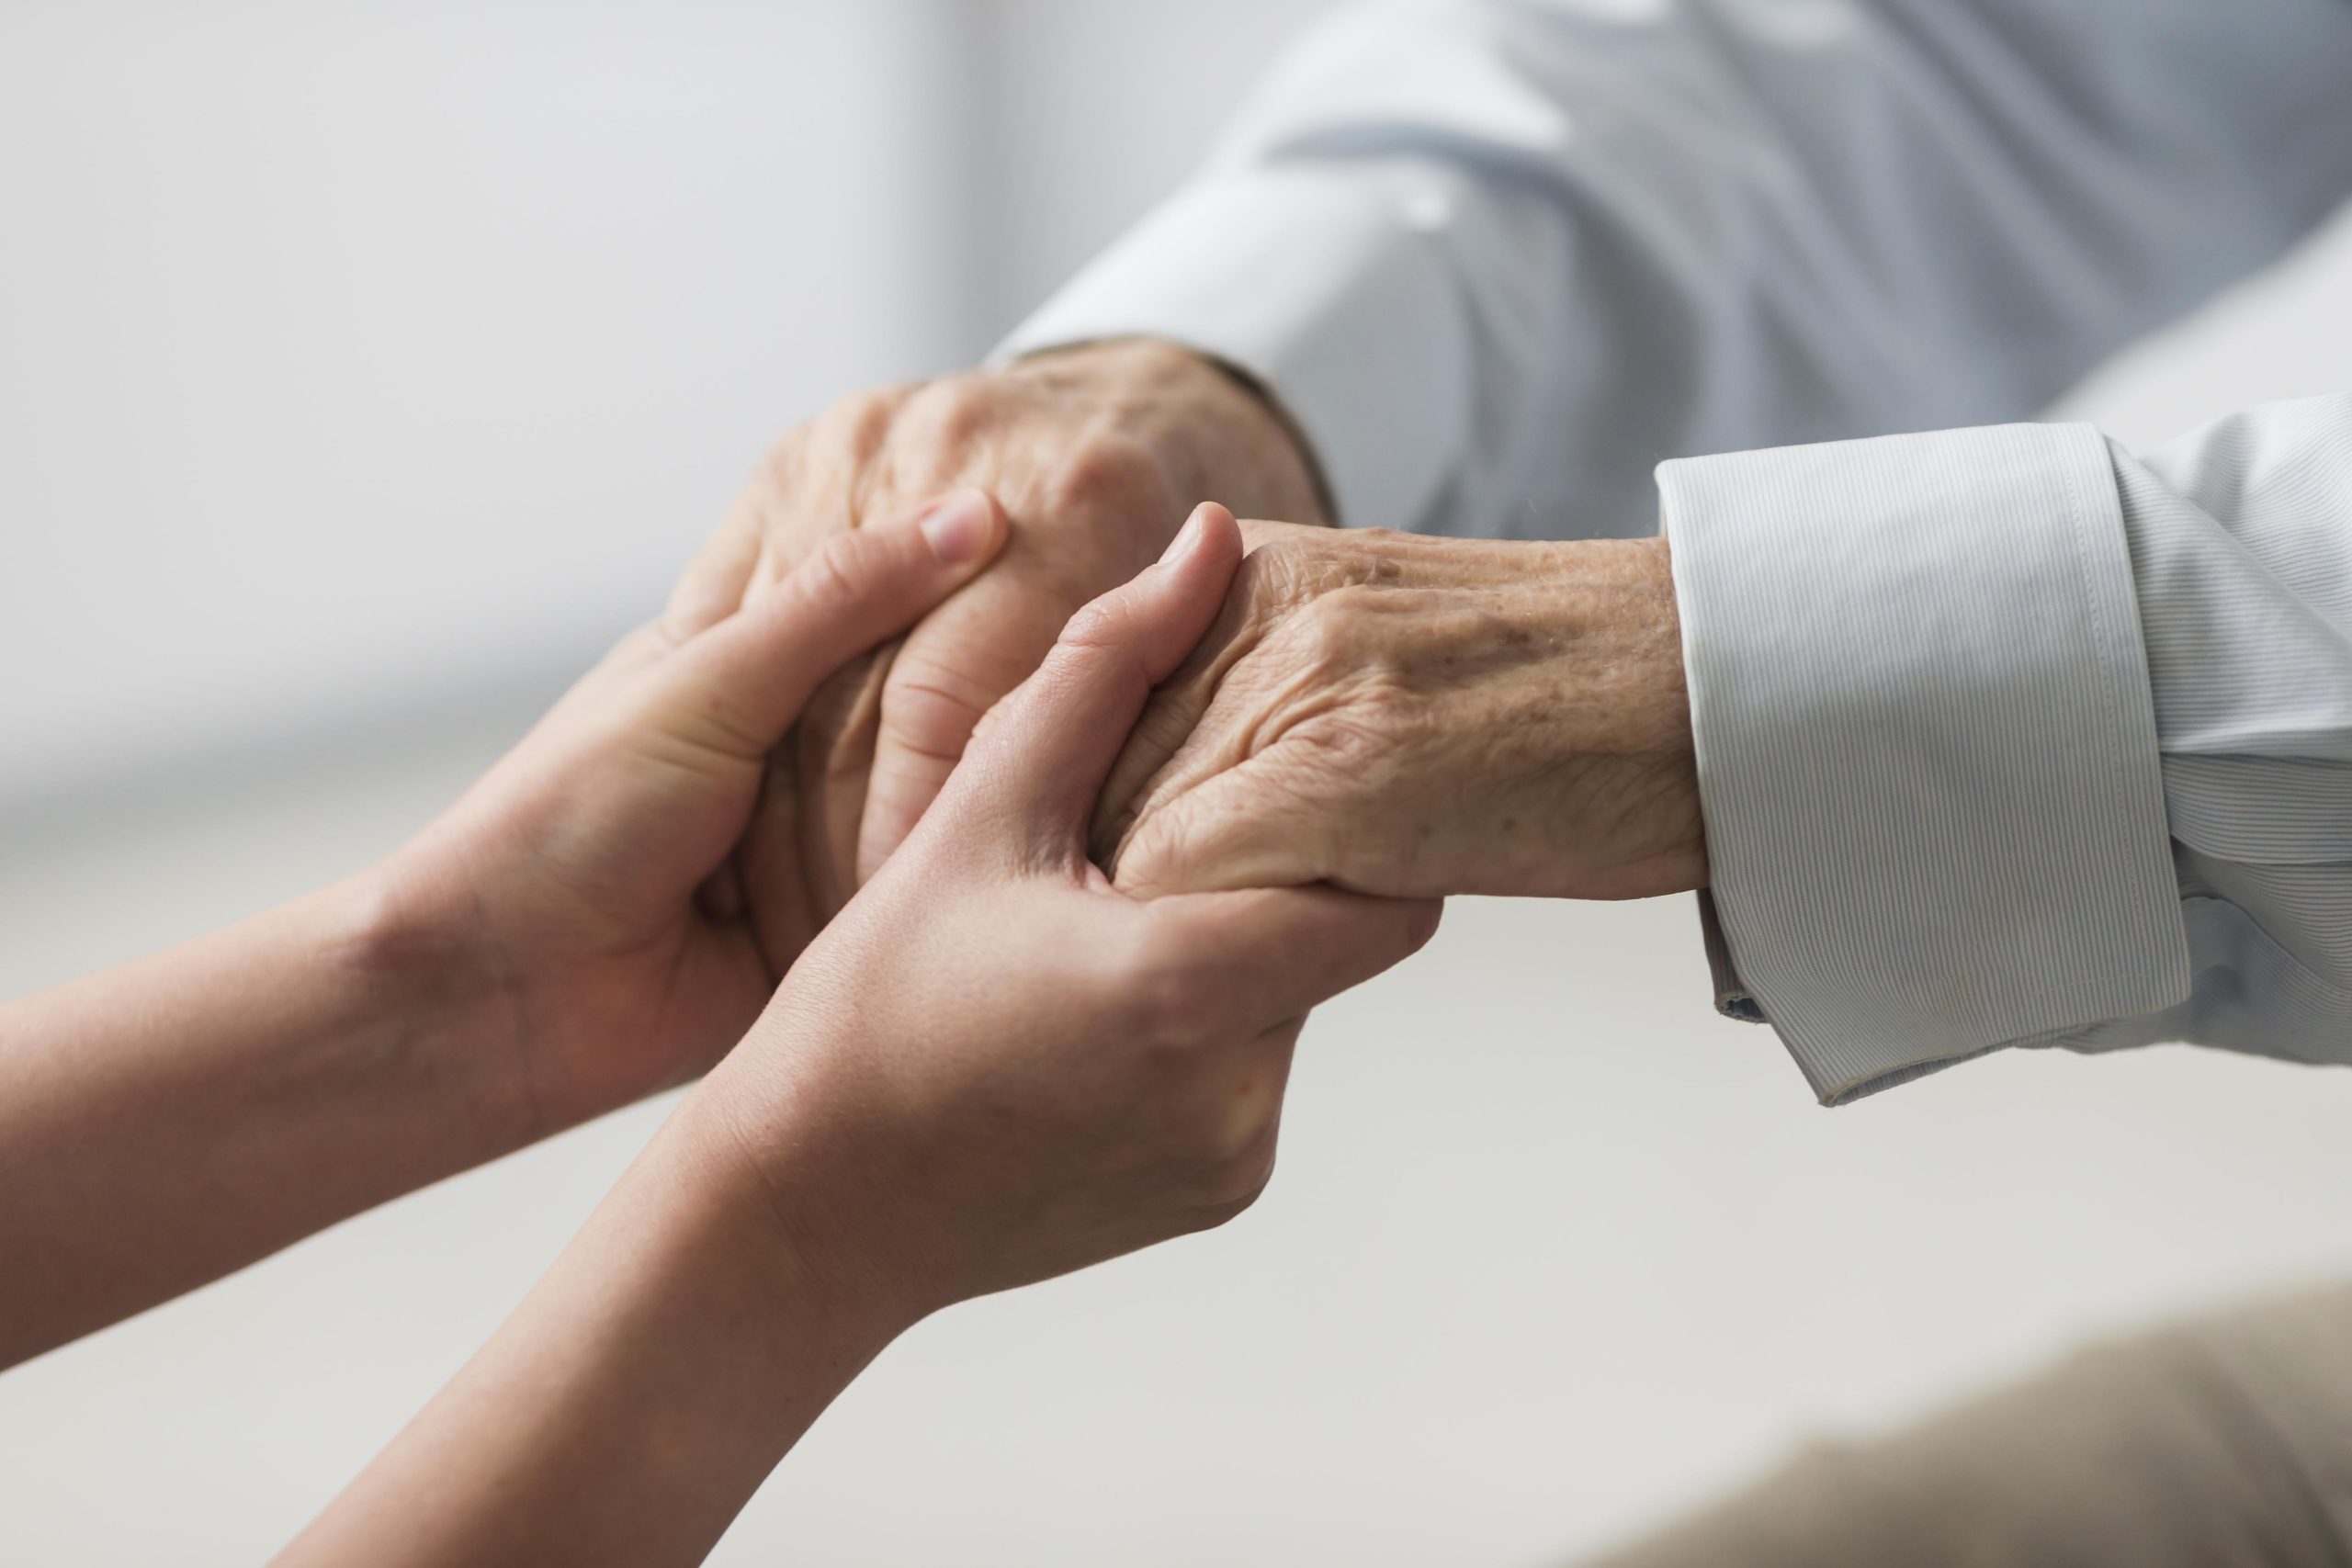 Providing Elder Care: Covering the Cost of Home Care, Assisted Living & Other Options